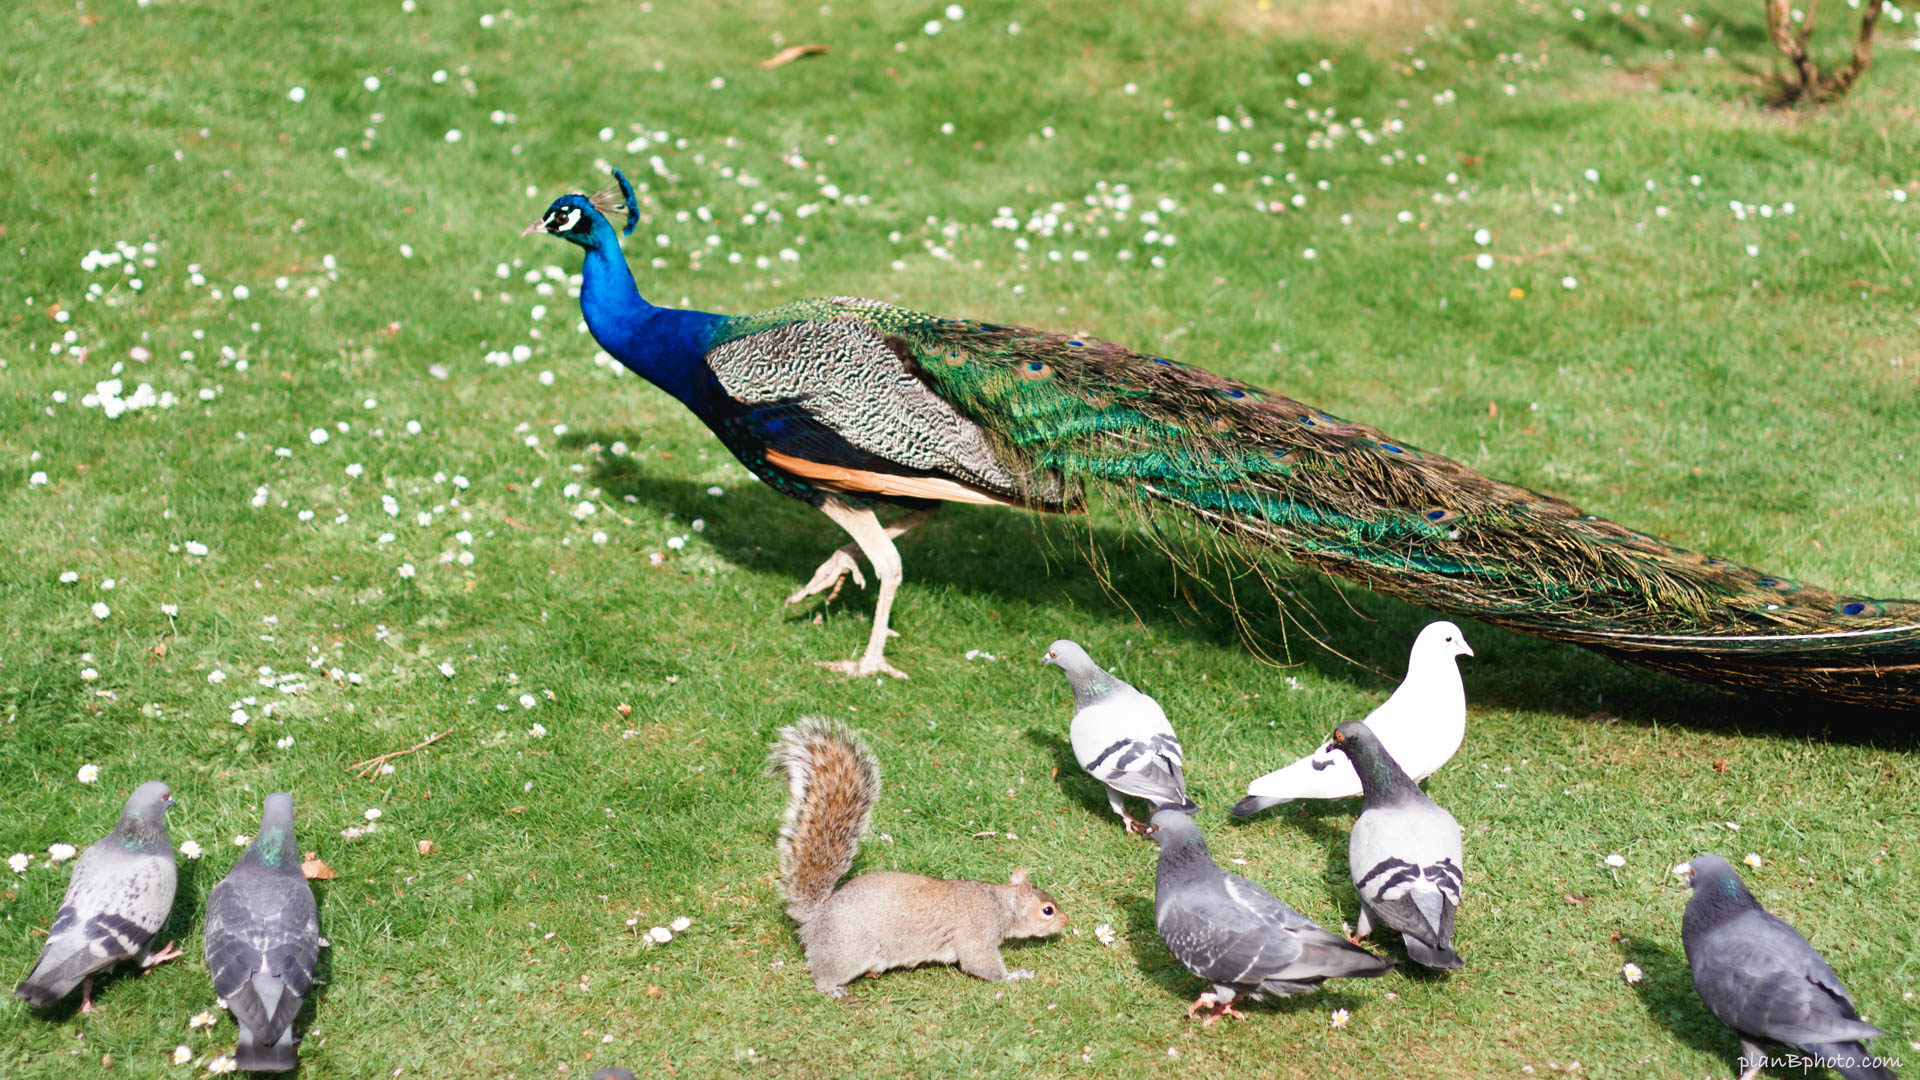 Peacock walking among pigeons and a squirrel